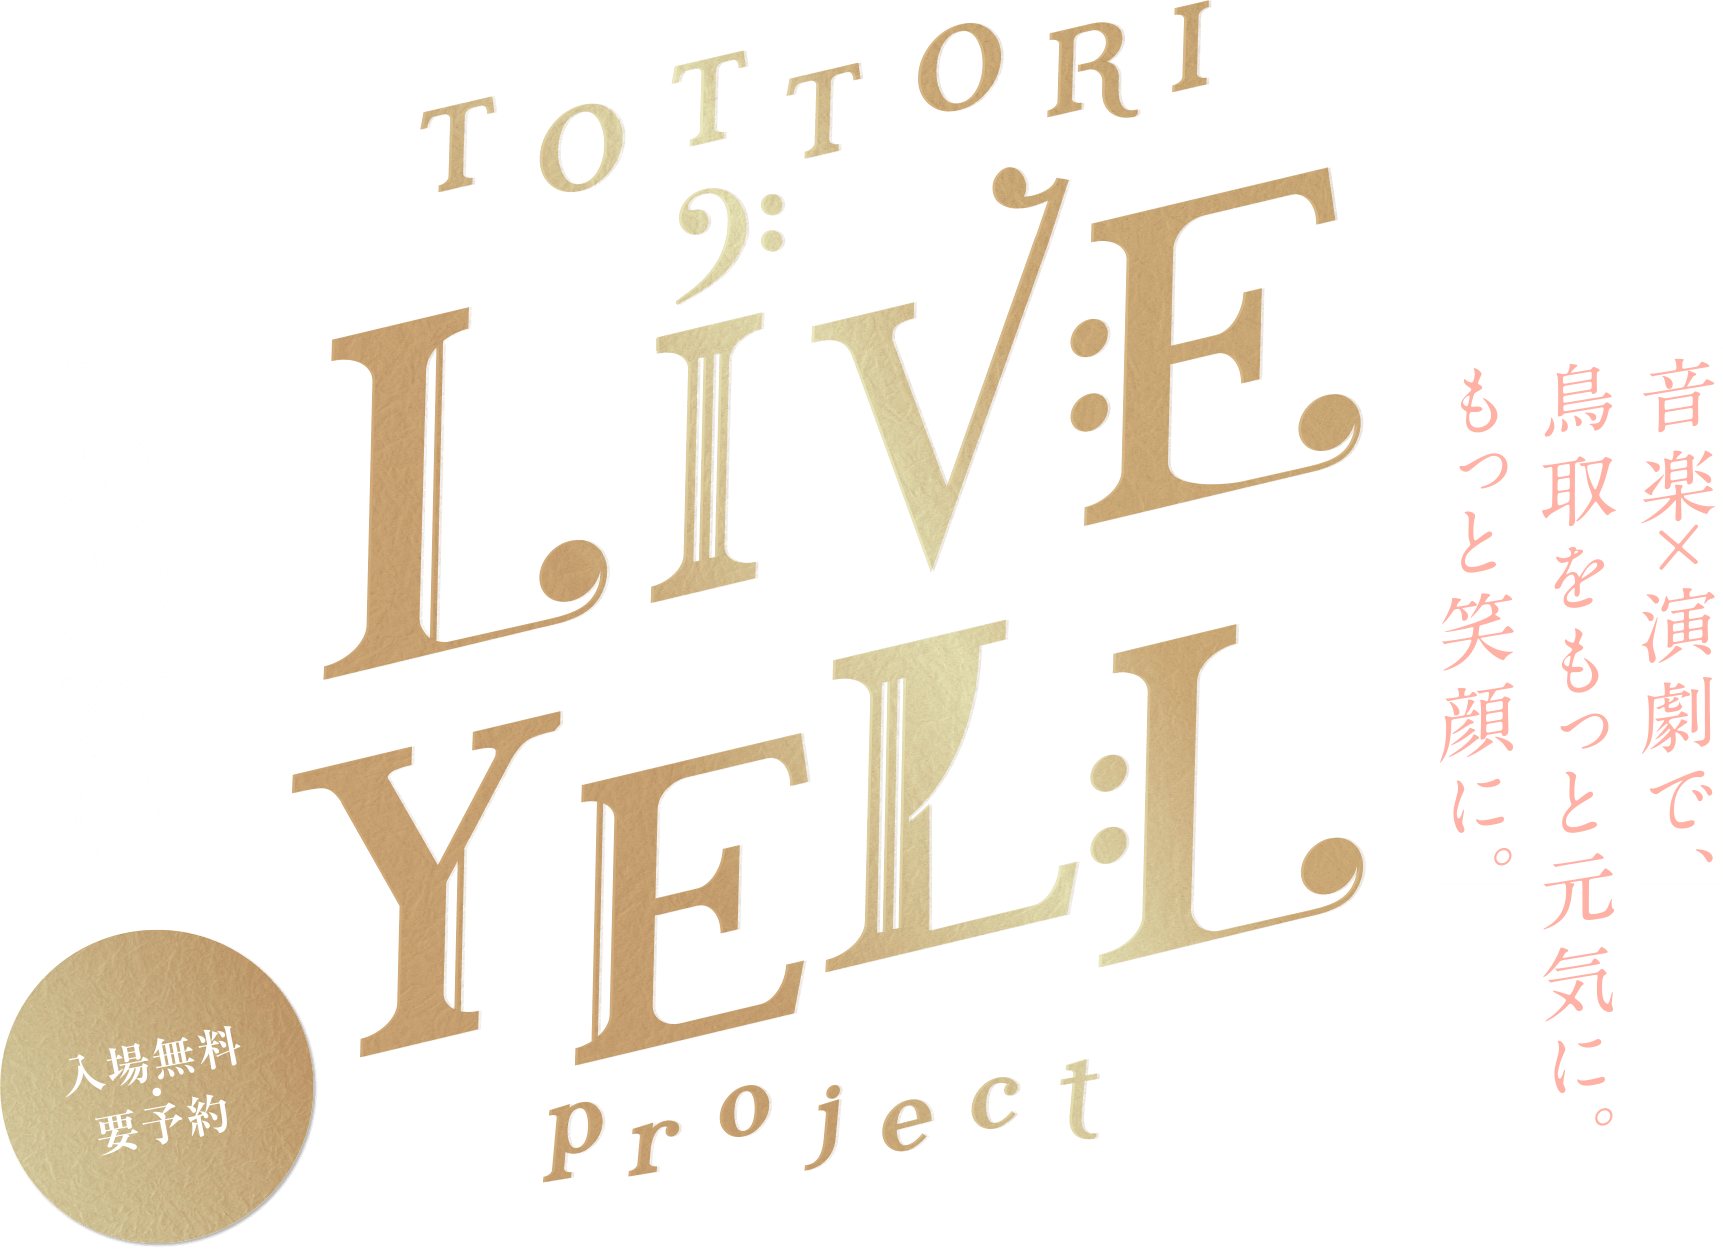 TOTTORI LIVE YELL Project